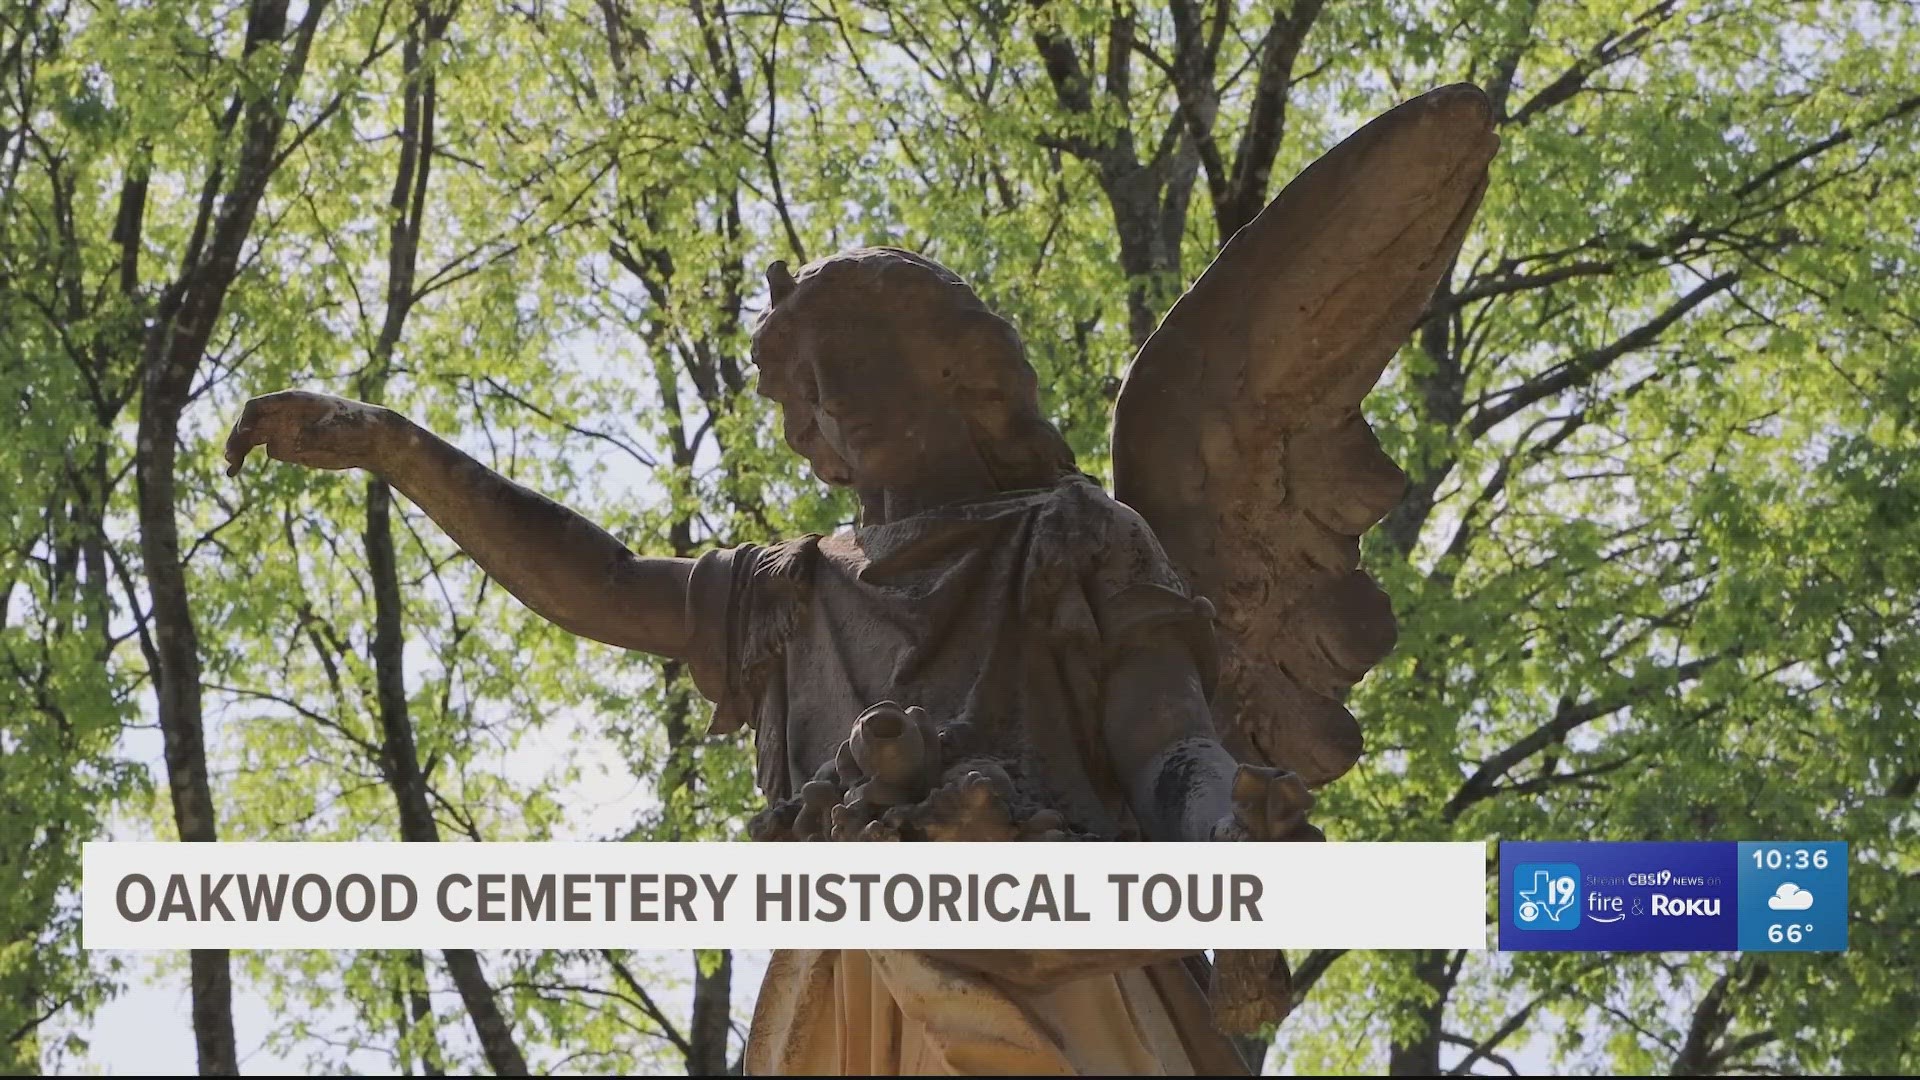 Guided tour tells stories found inside historic Oakwood Cemetery in Tyler